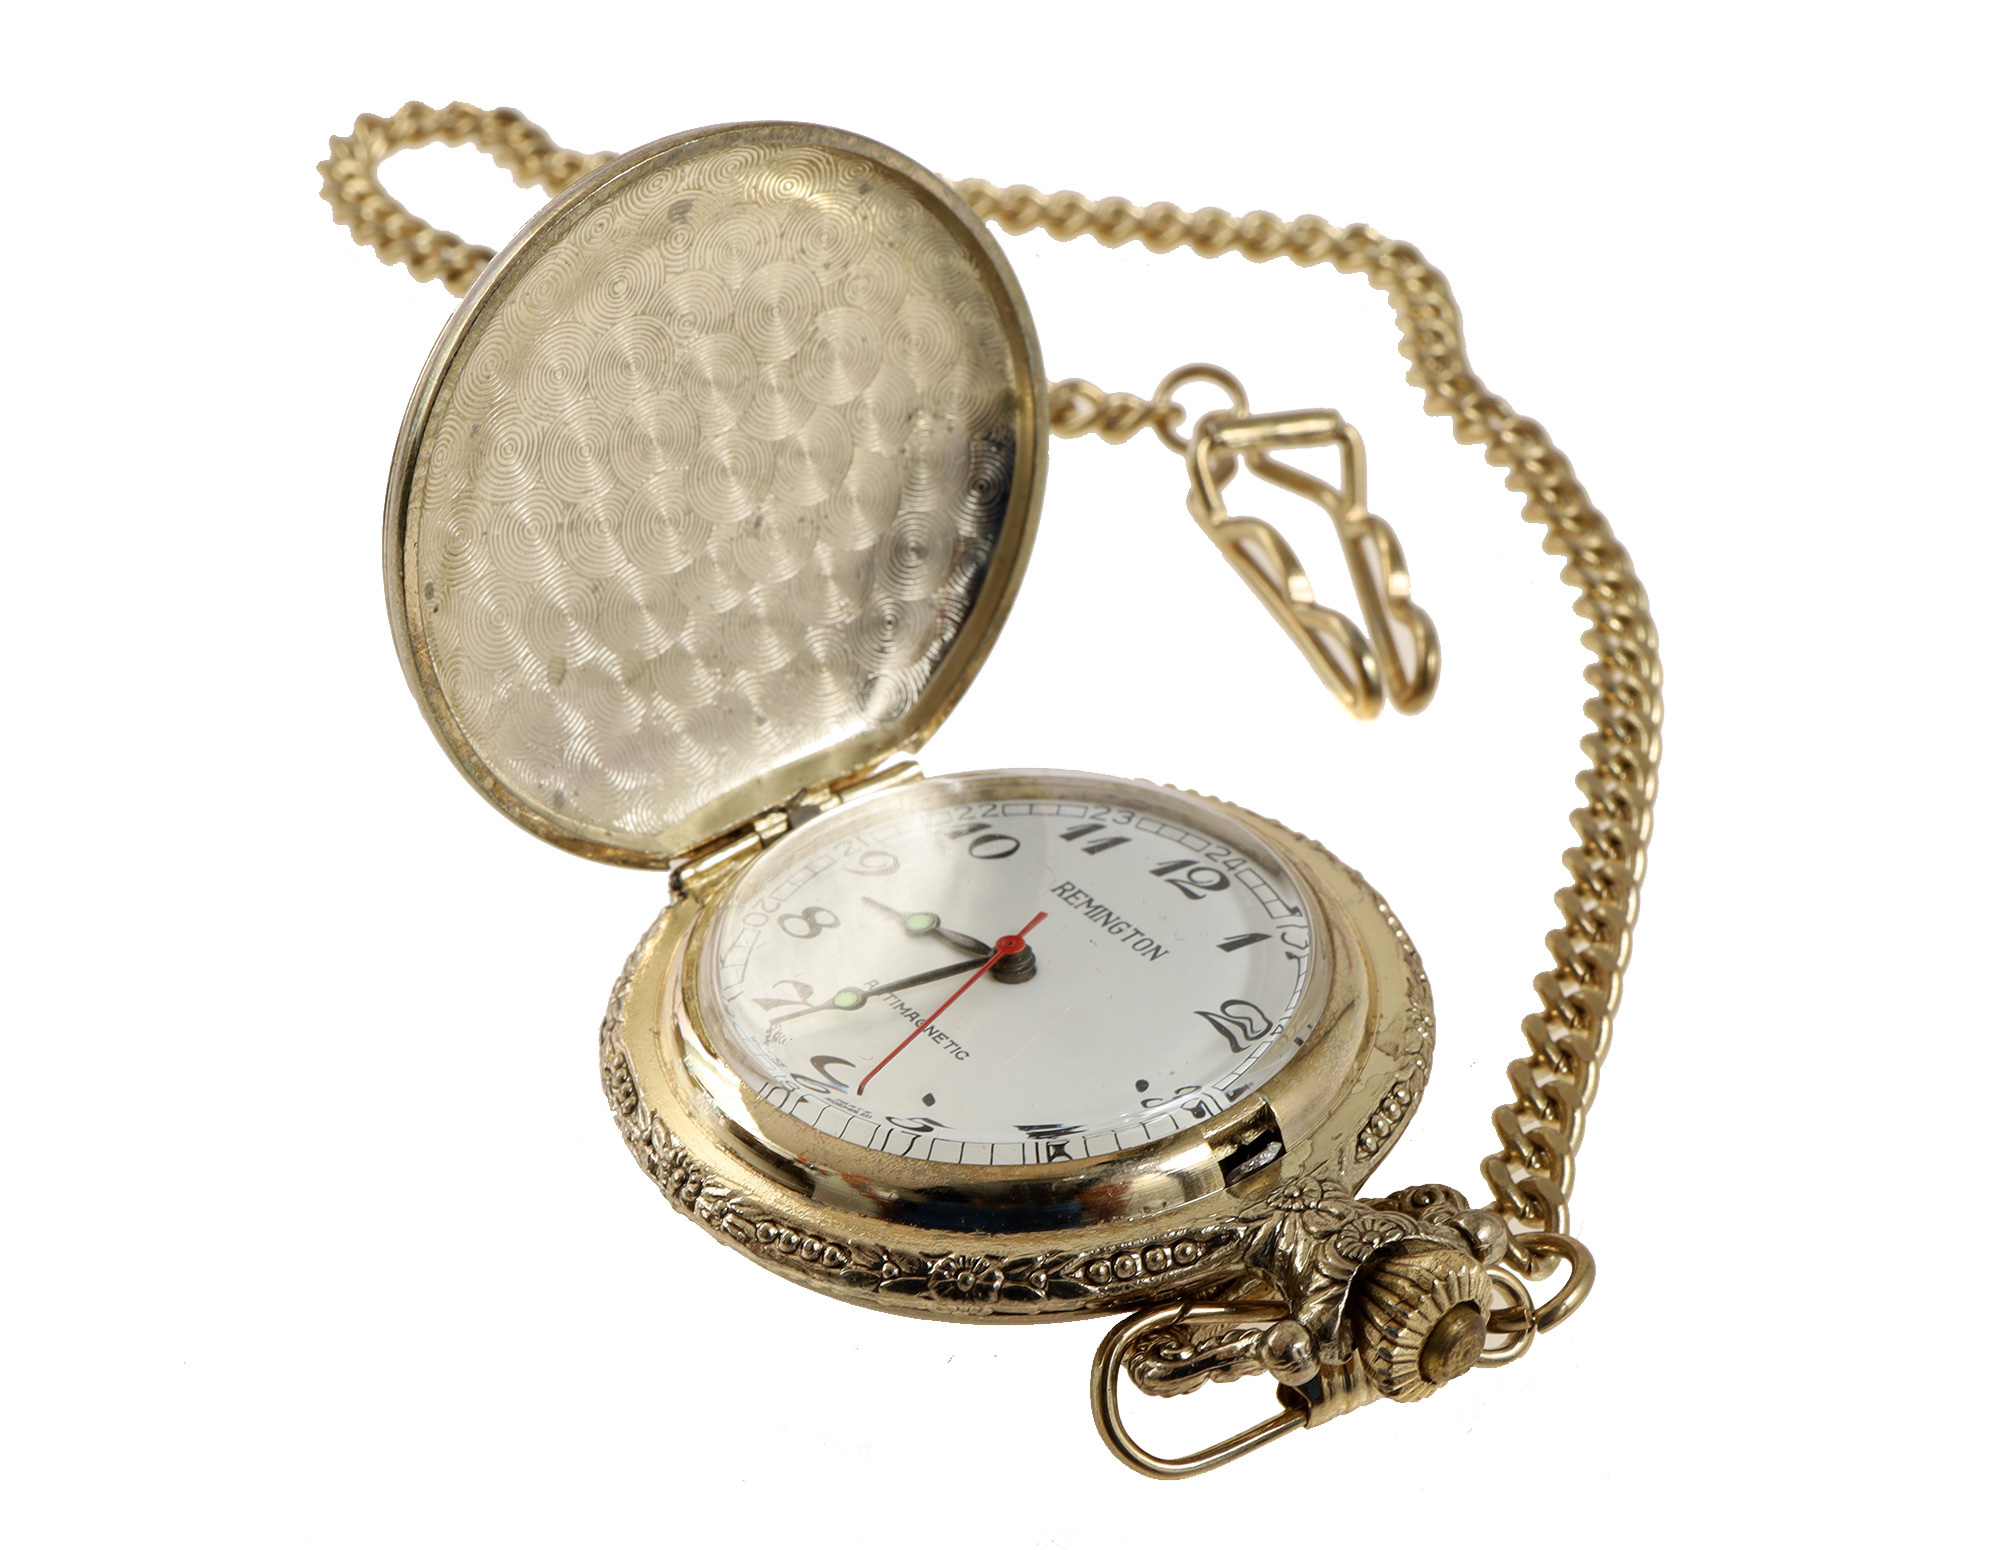 SET OF SEVEN REMINGTON POCKET WATCHES WITH CHAINS PIC-7